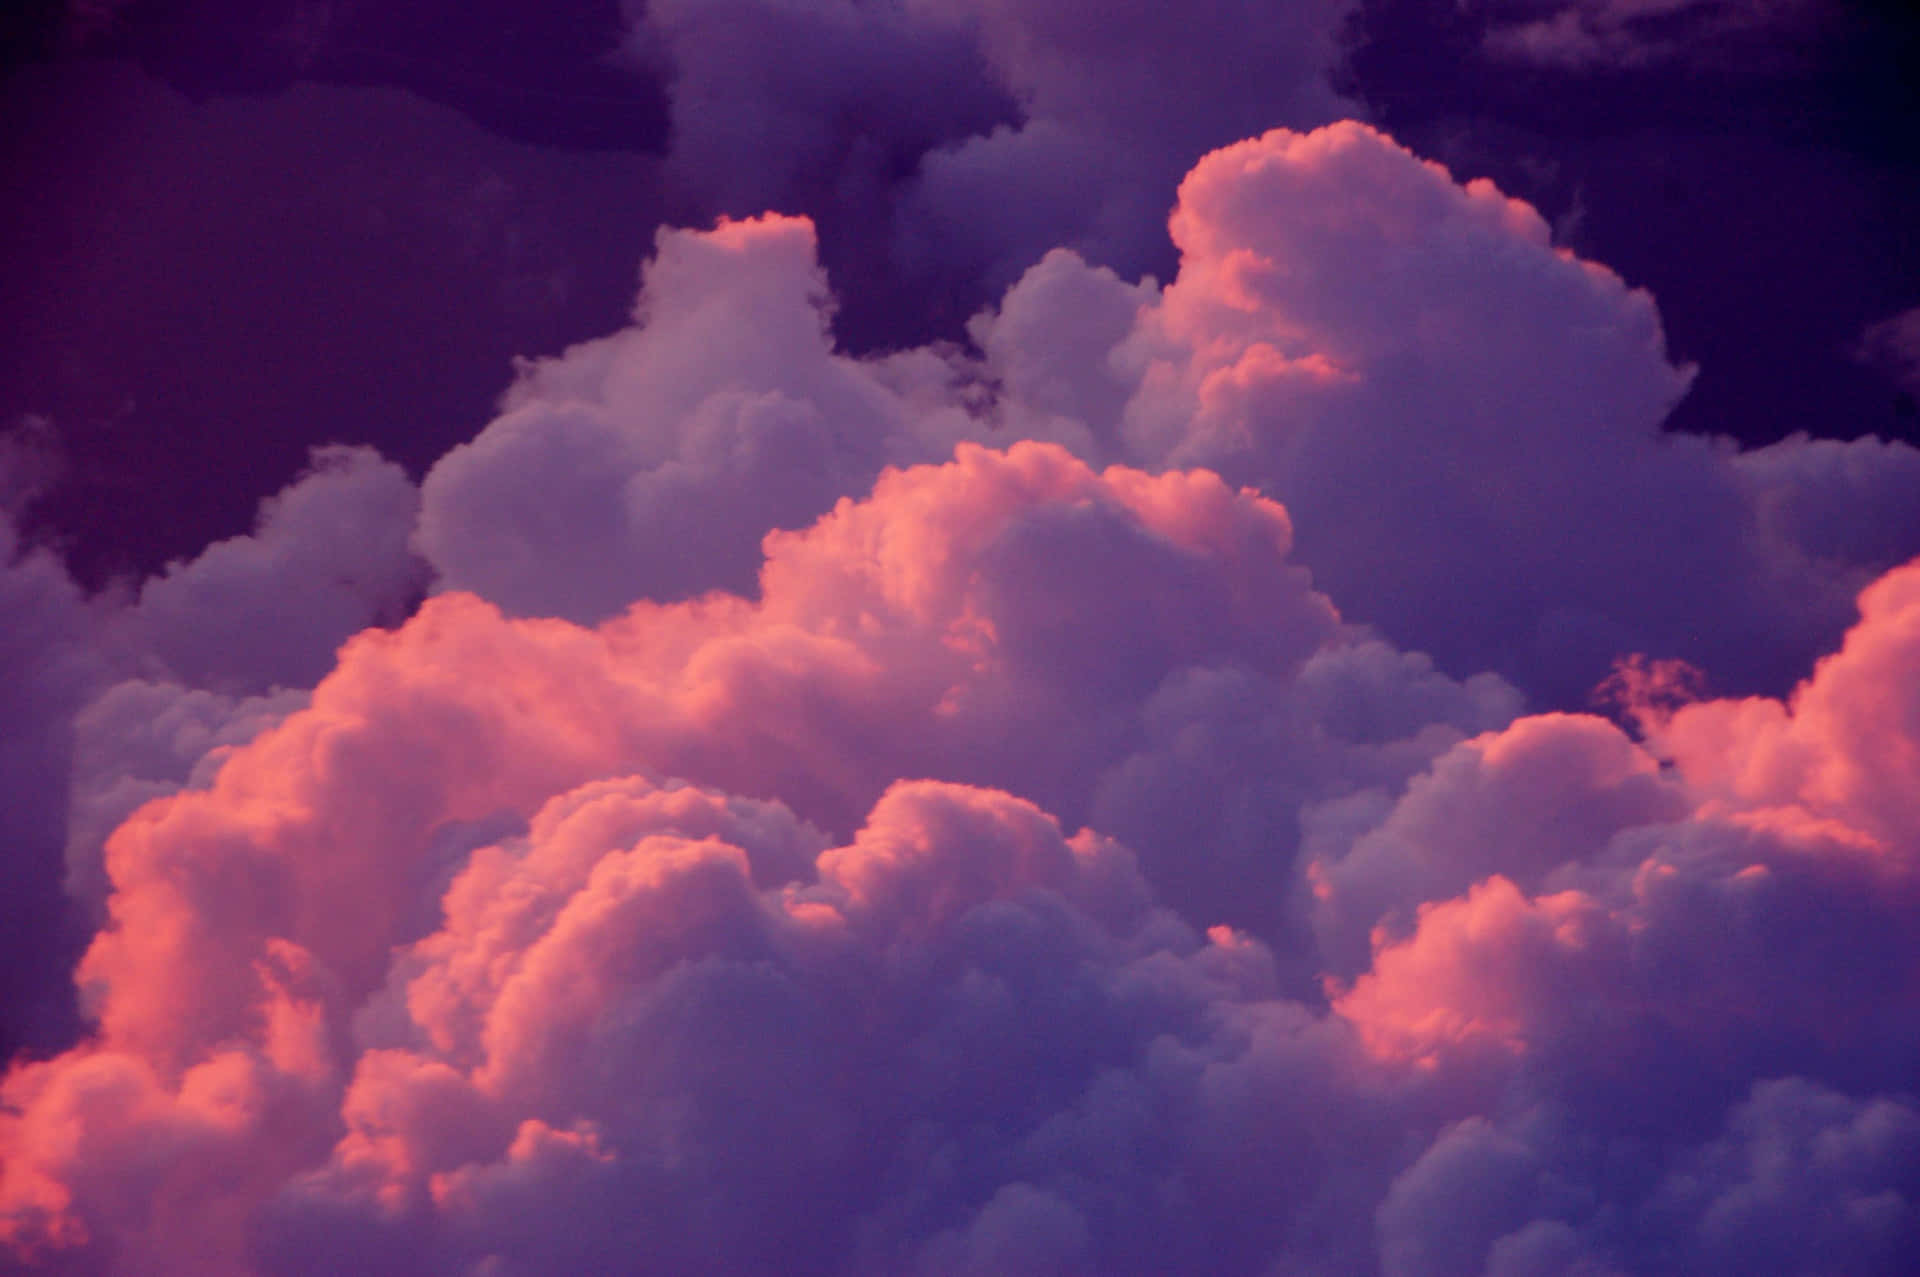 The beauty of the sky, seen in majestic clouds. Wallpaper